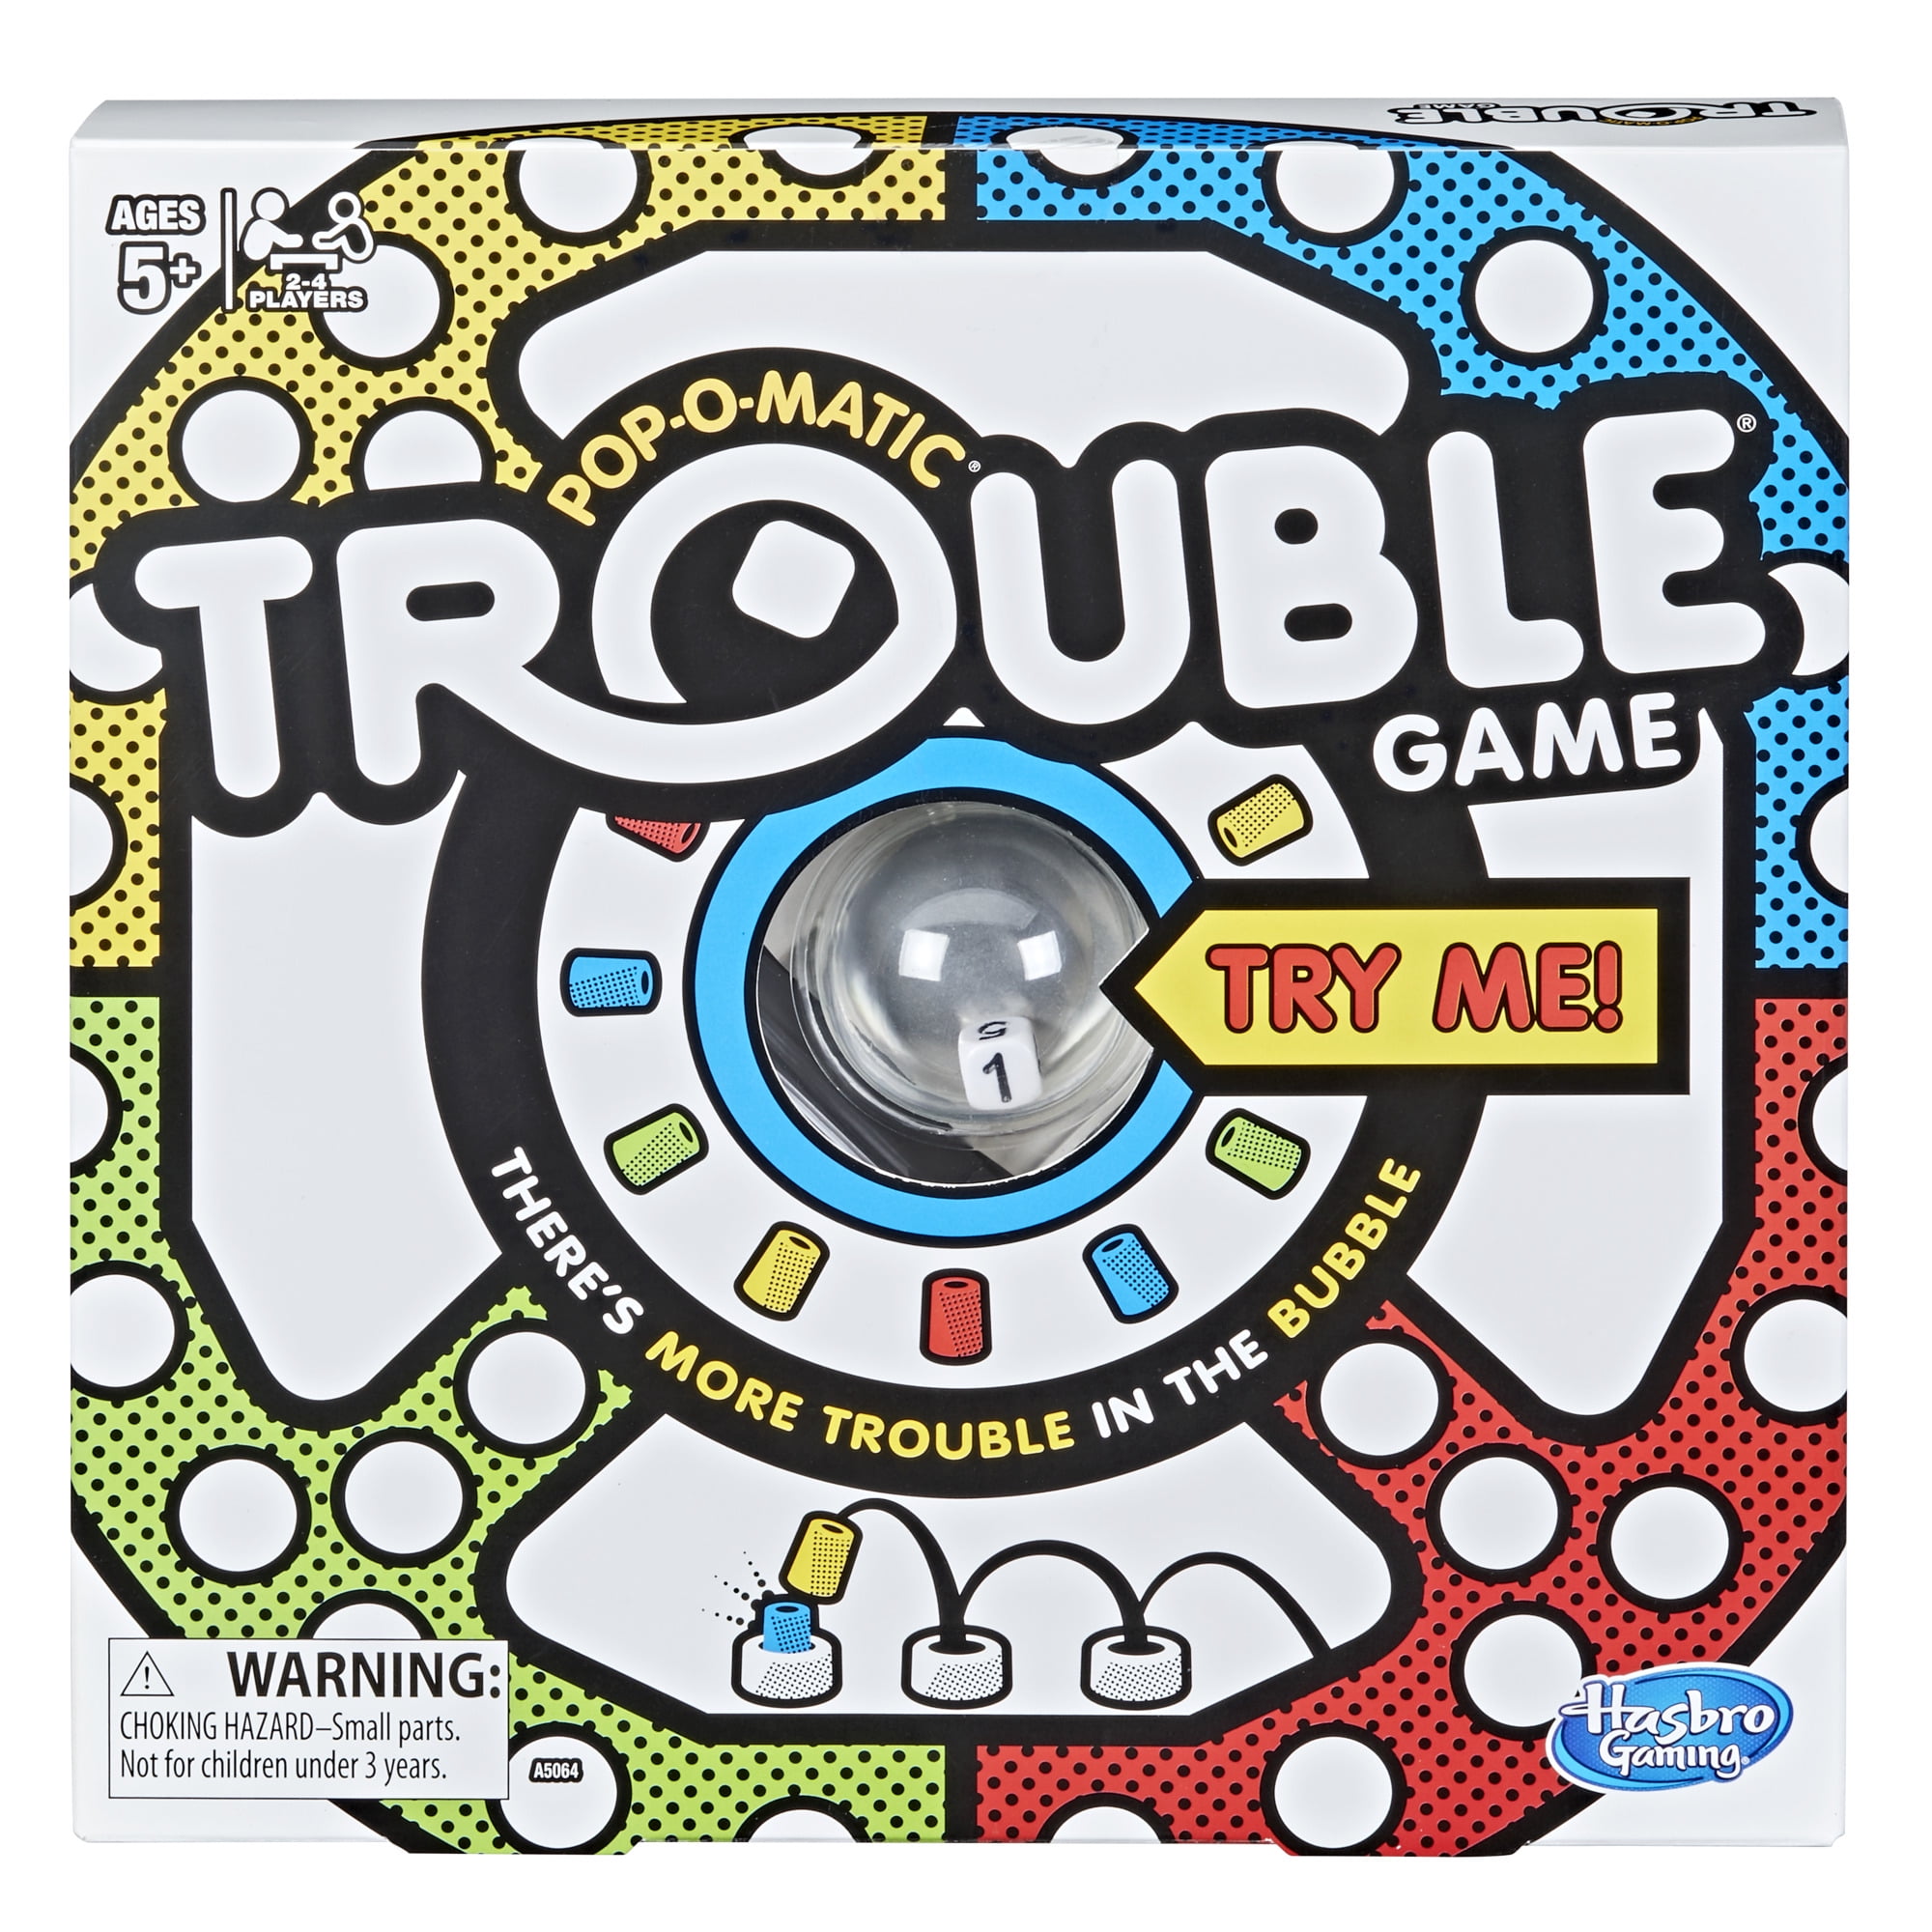 Trouble Game, Pop-O-Matic, Kids & Family Party Board Game with 16 Pegs